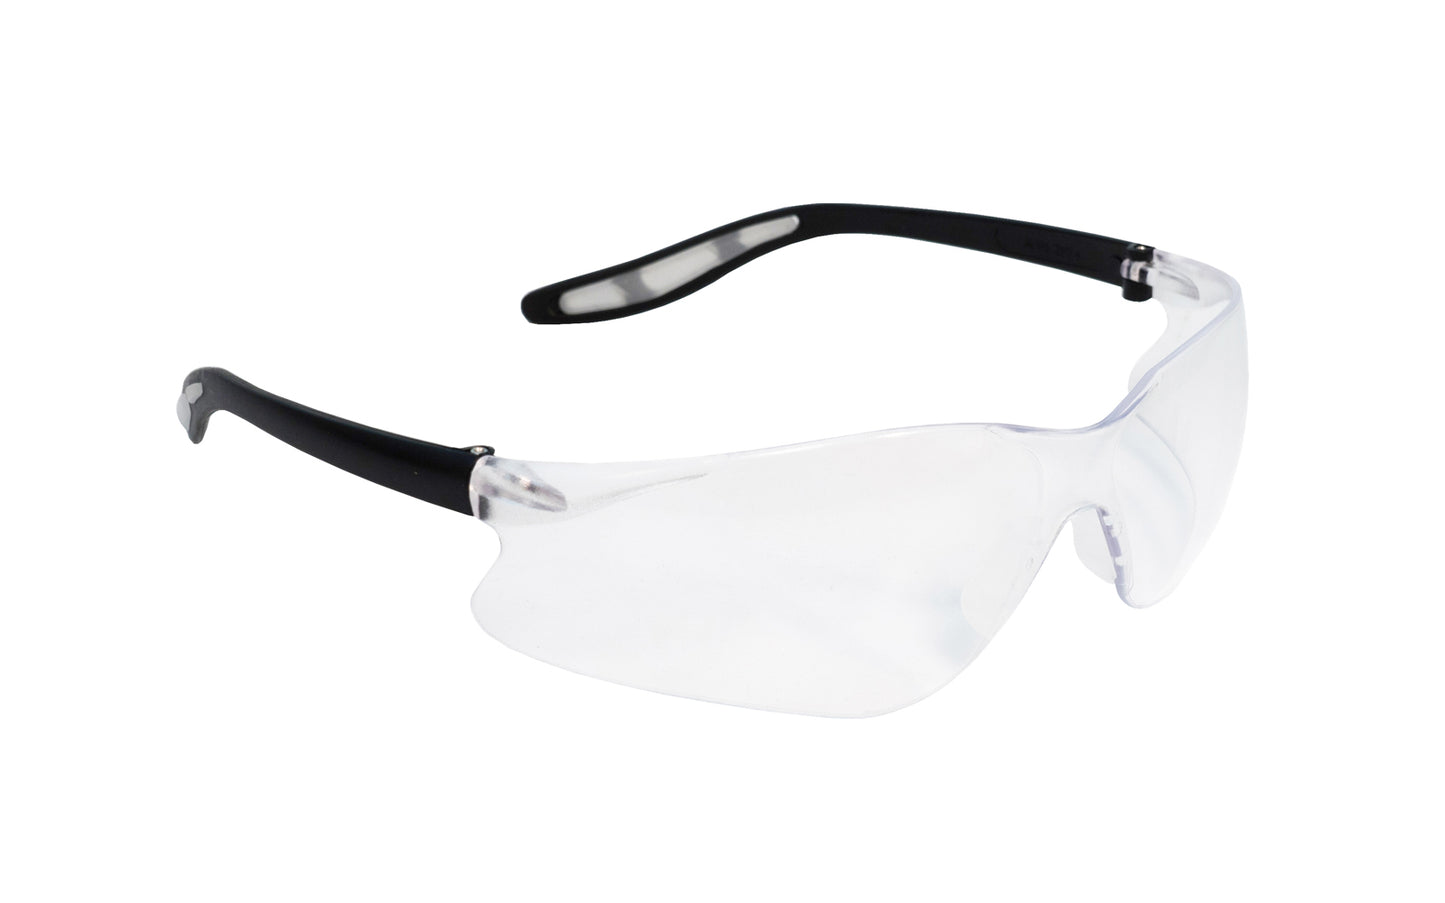 Fastcap Safety Glasses have clear lenses & great for the shop & good for outdoor sporting activities. Anti-fog & anti-static lenses. FastCap "CatEyes" Clear lenses. ANSI rated Z87.1. No magnification. UV Protection - UVB 95% UVA 60%. ANSI / OSHA approved. Shatterproof & scratch resistant. 663807800893. Model SG-AF-P510